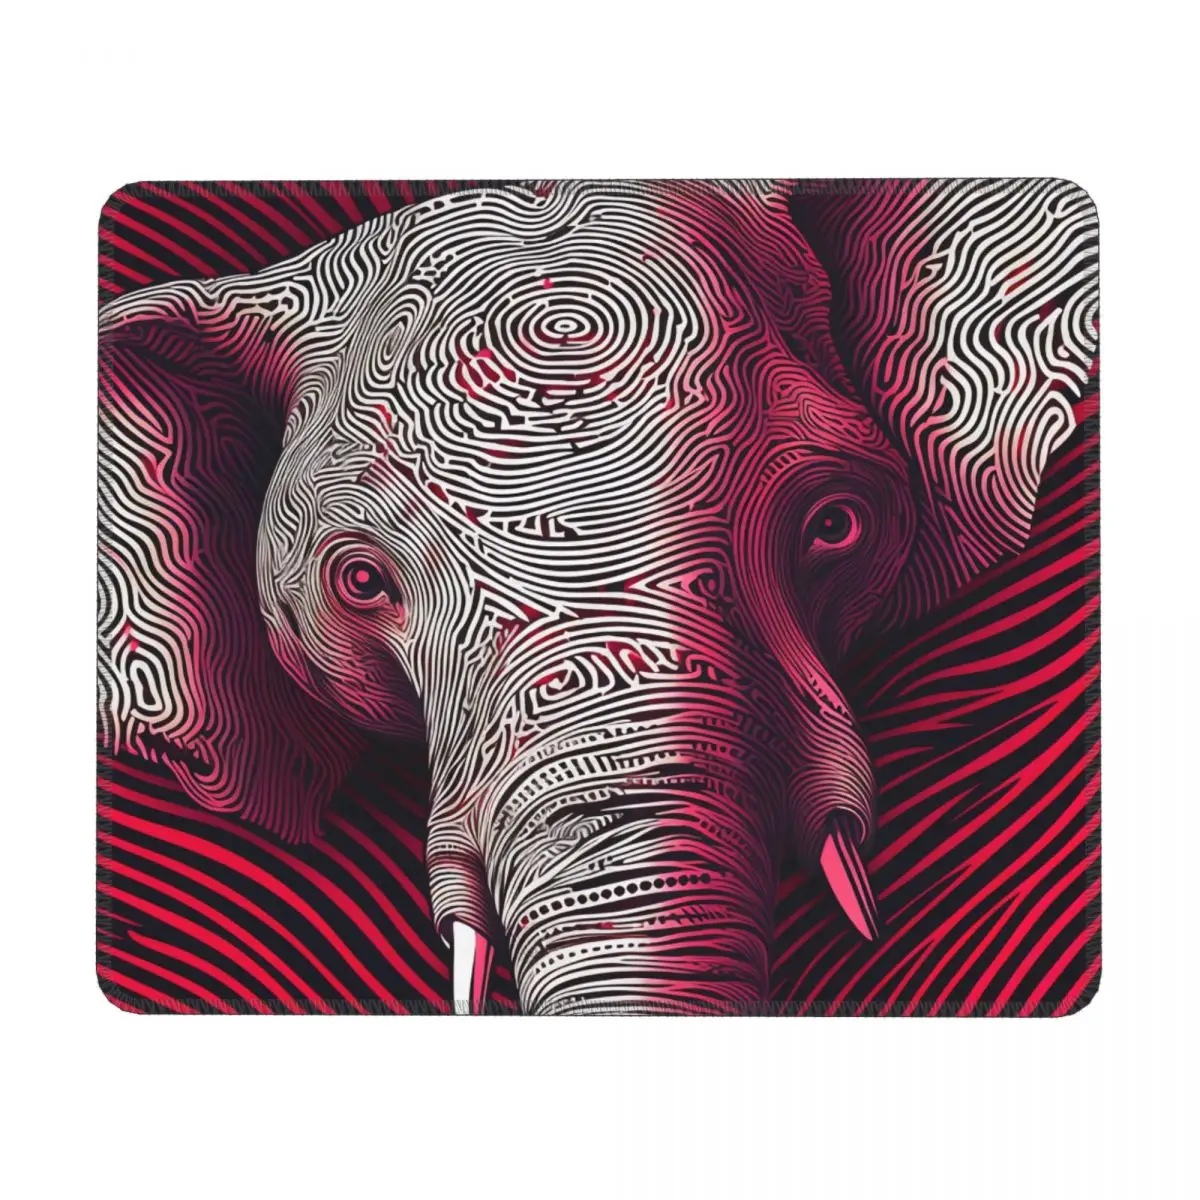 

Elephant Horizontal Print Mouse Pad Portraits Psychedelic Lines Rubber Office Mousepad Non Slip Vintage Quality Mouse Pads